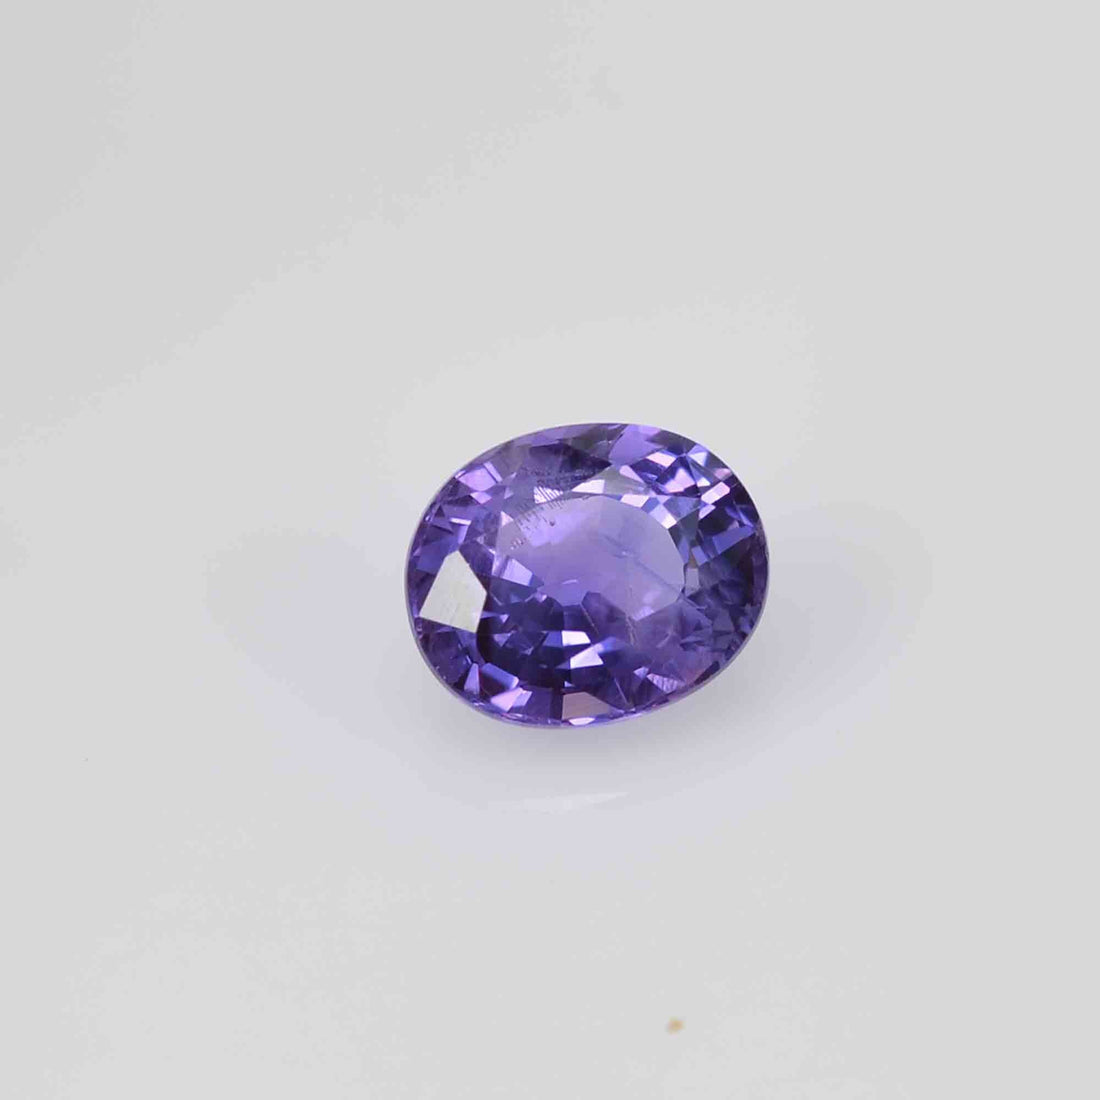 1.04 cts Natural Purple Sapphire Loose Gemstone Oval Cut